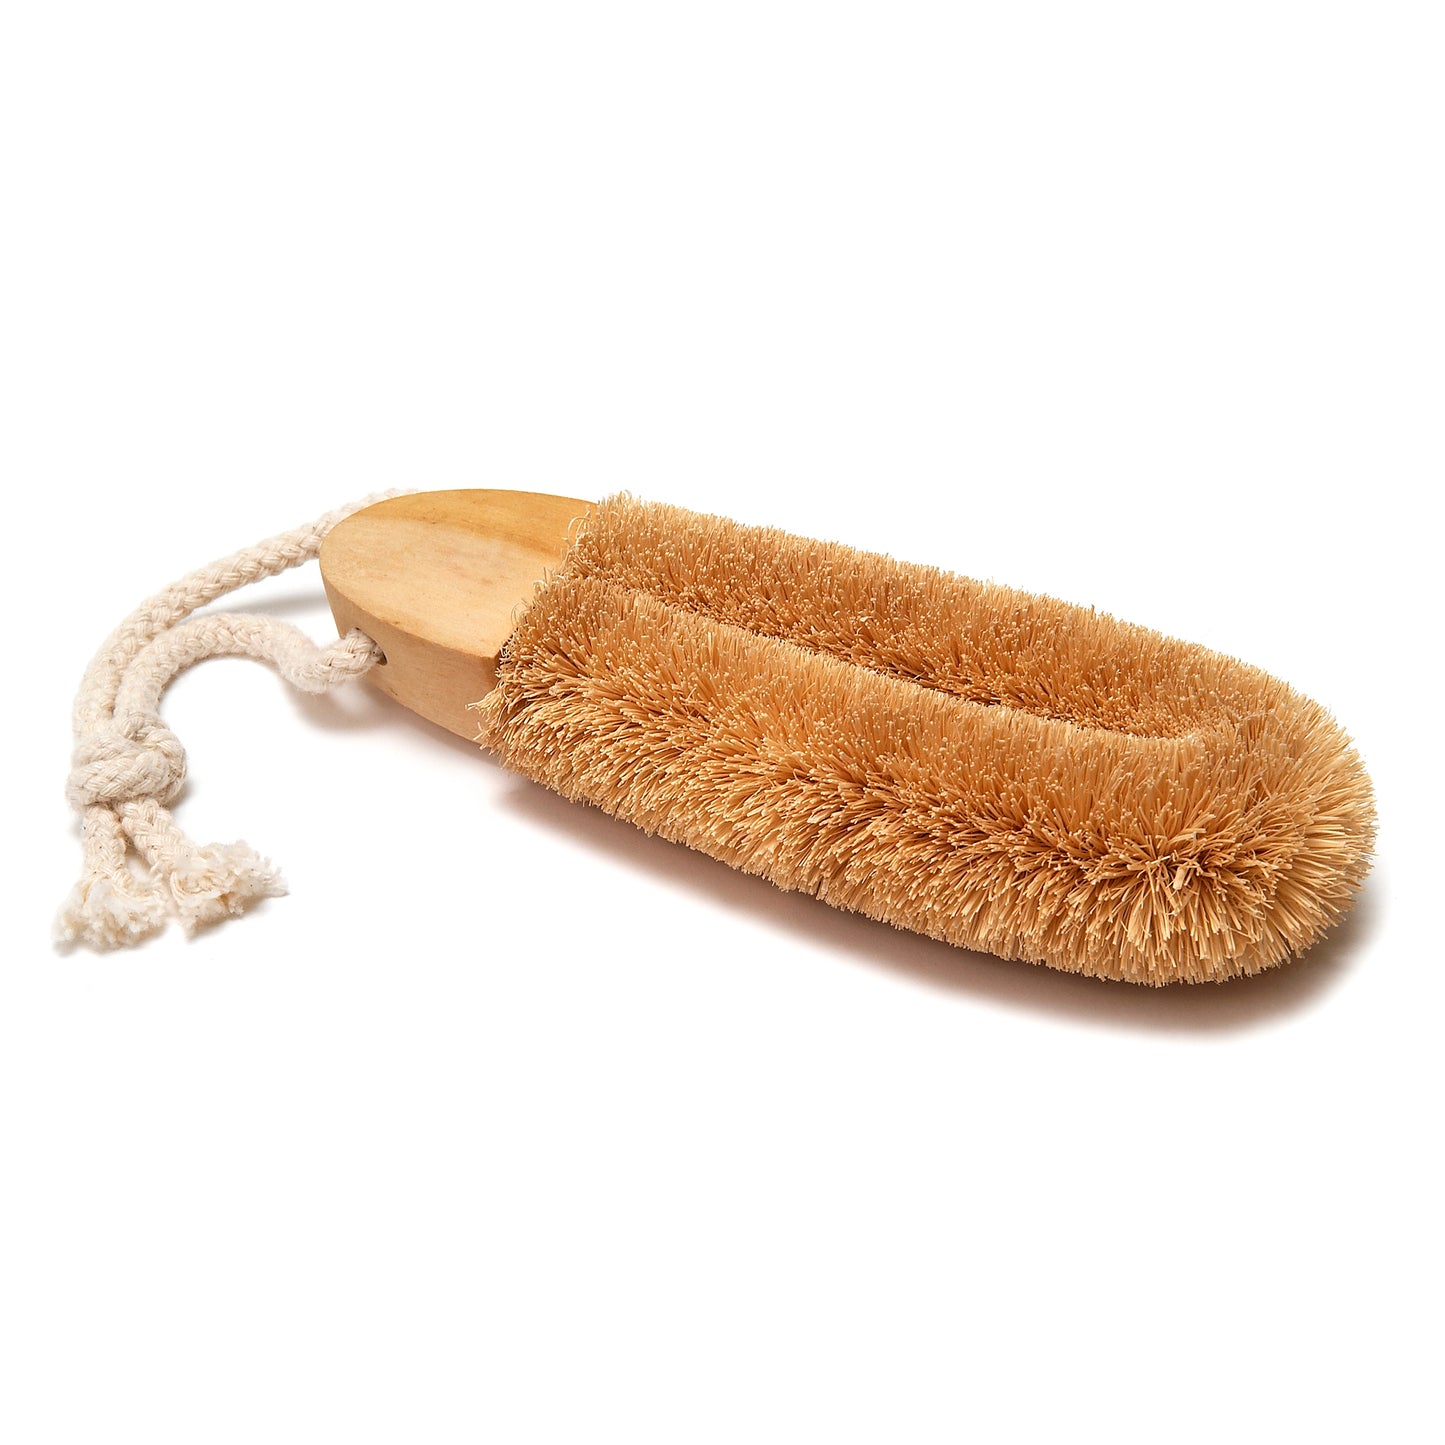 Coconut Brush and Foot Butter - Set